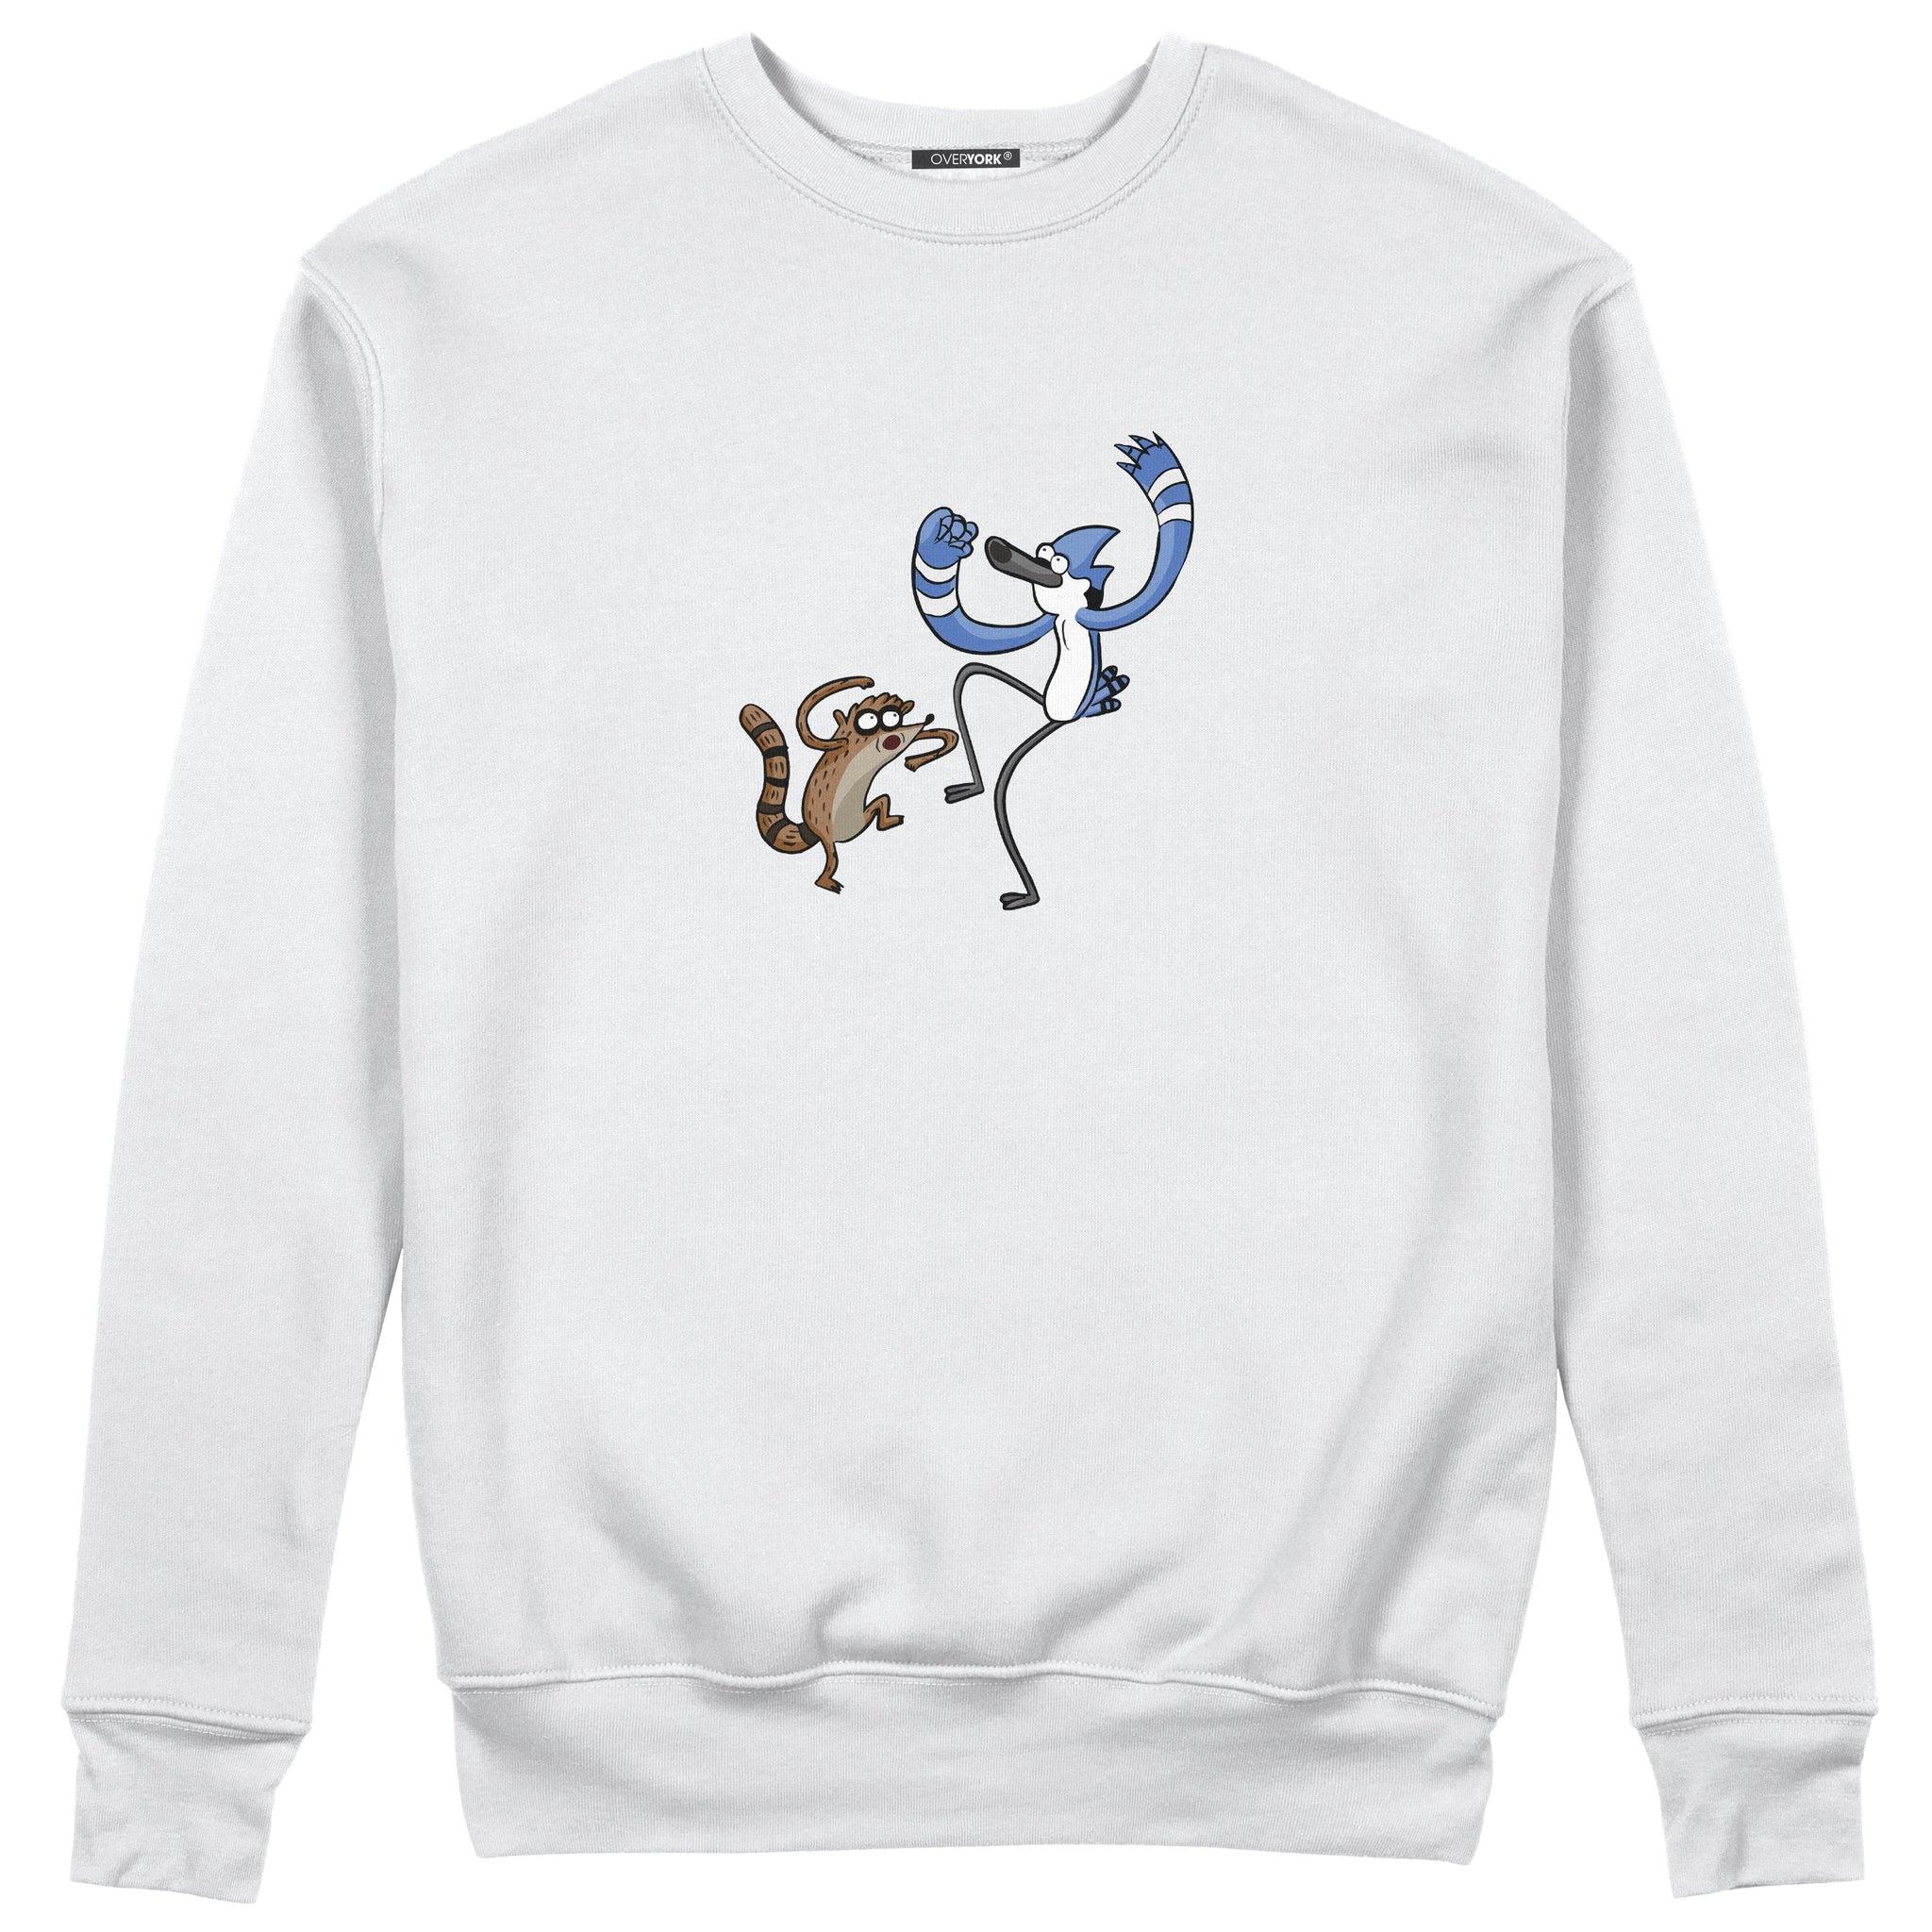 Rigby - Sweatshirt OUTLET